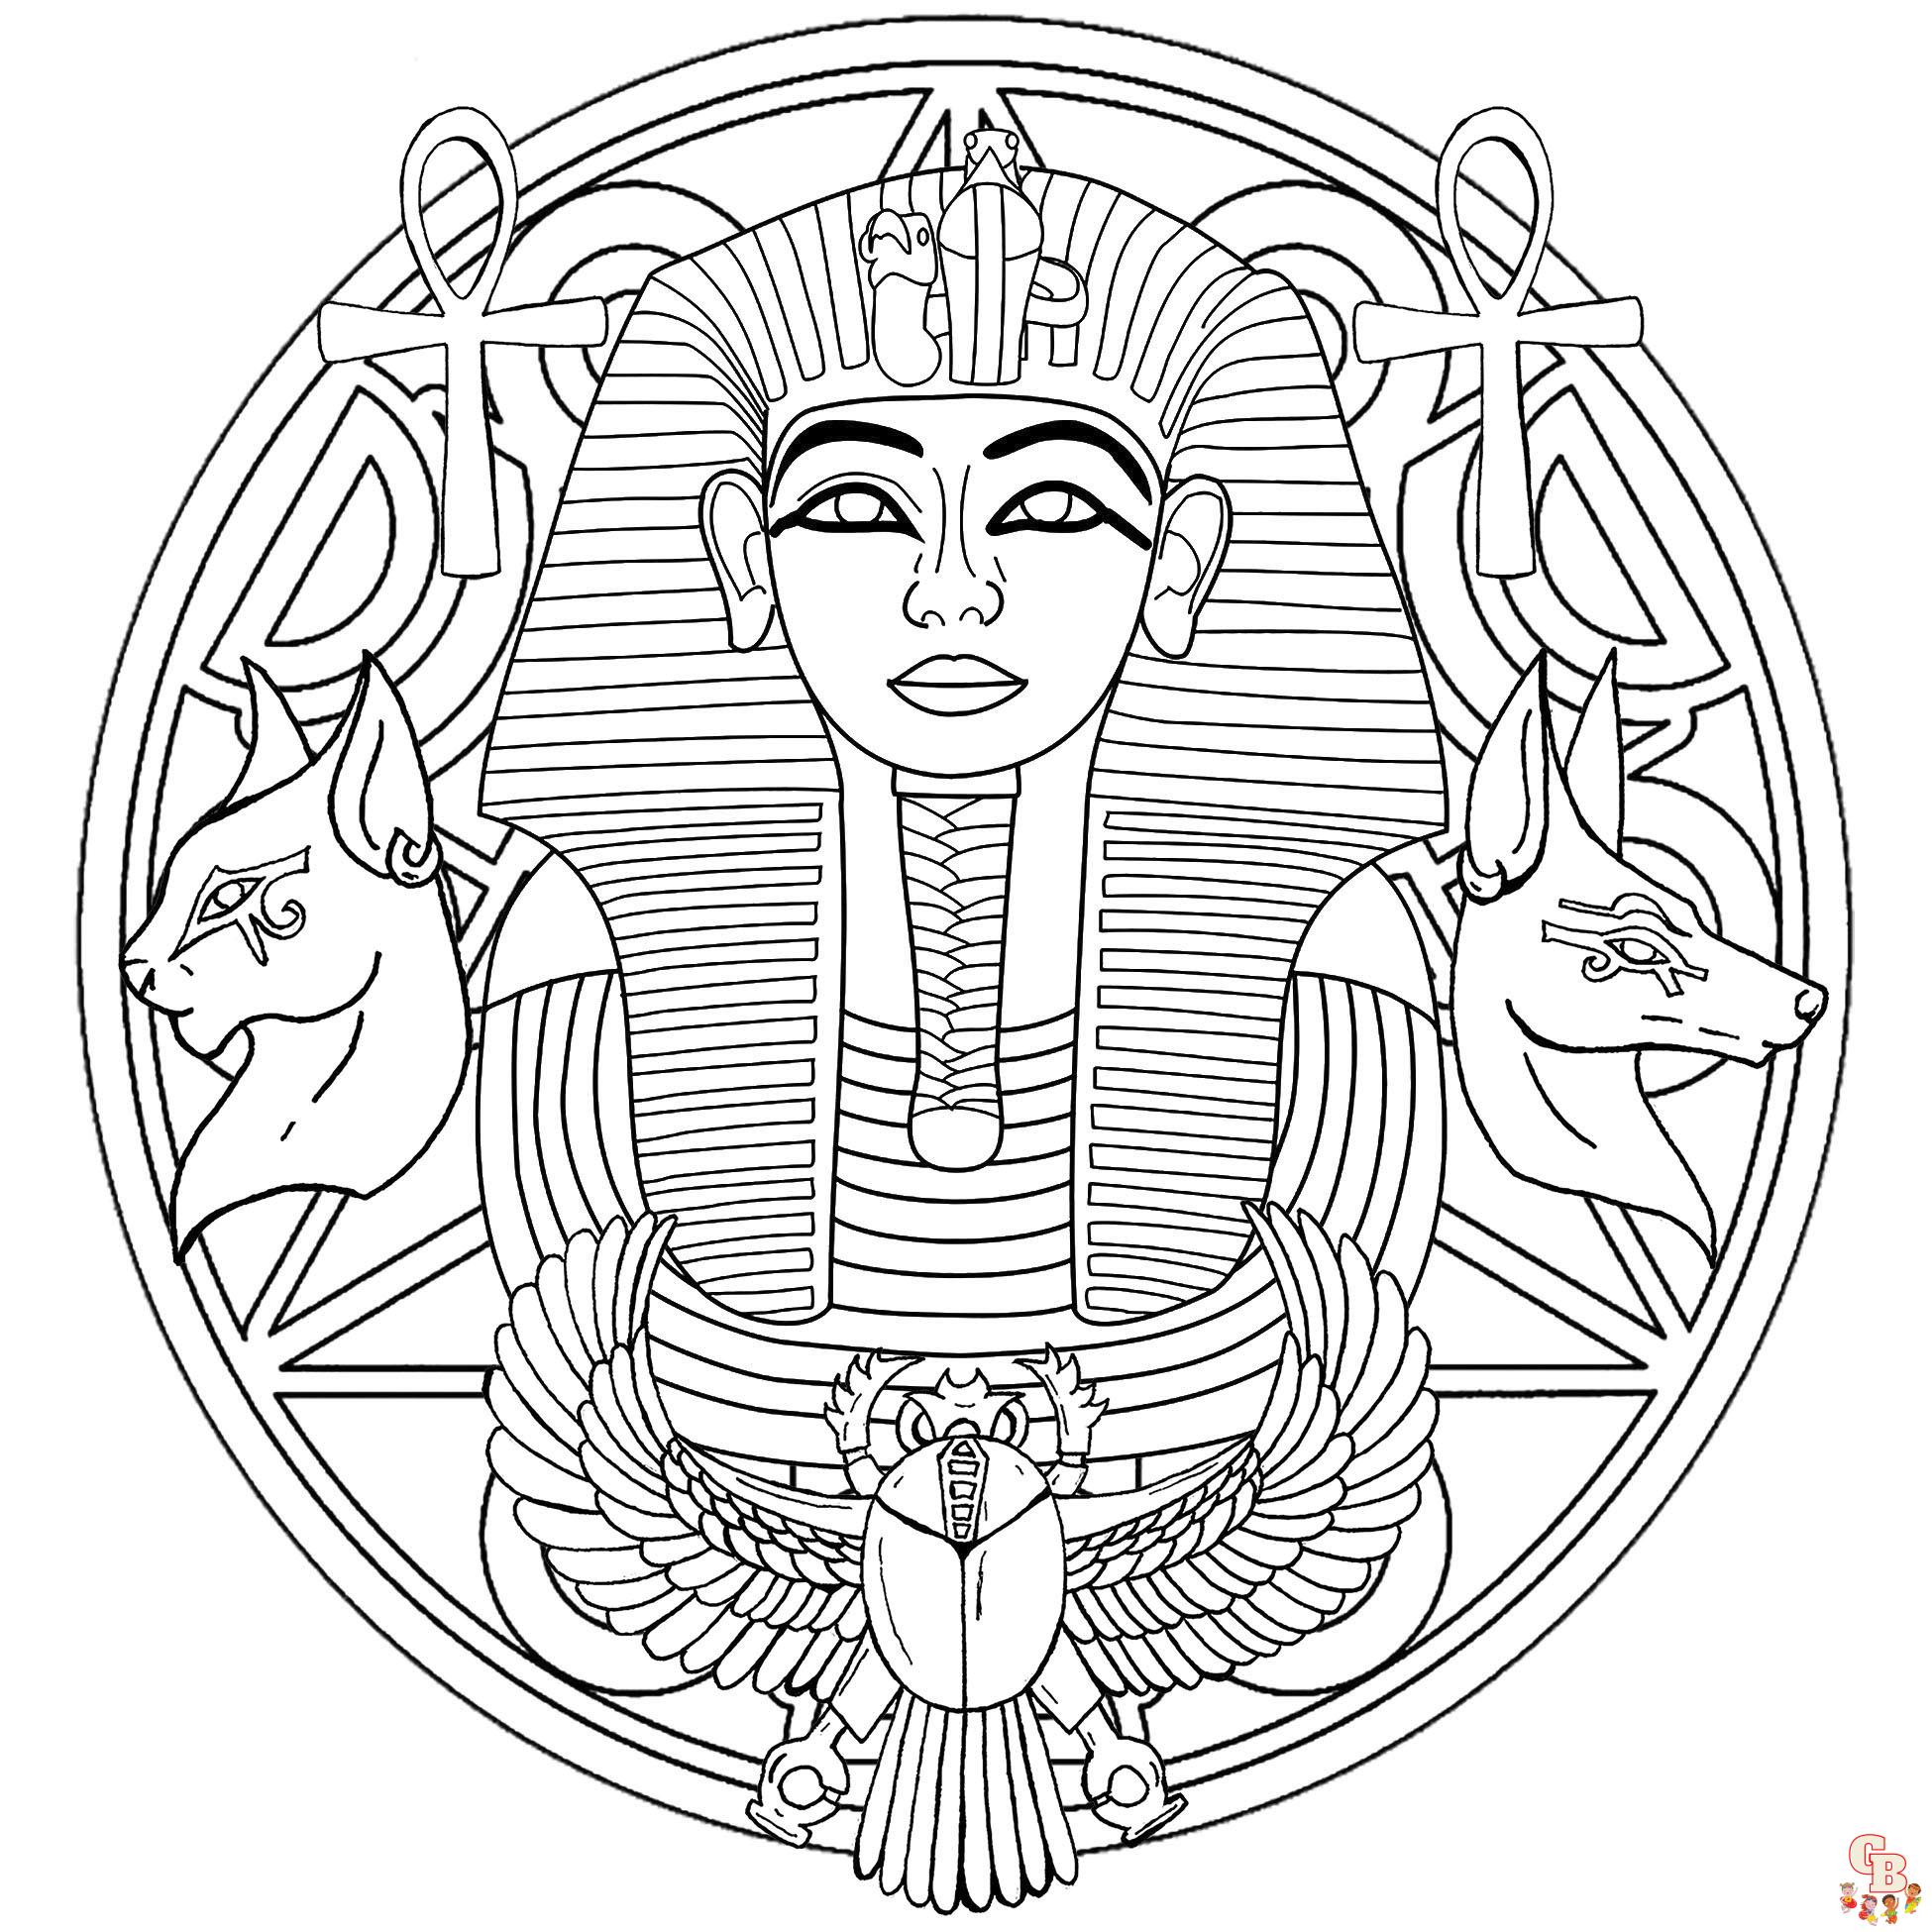 Egyptian Masks coloring pages 3